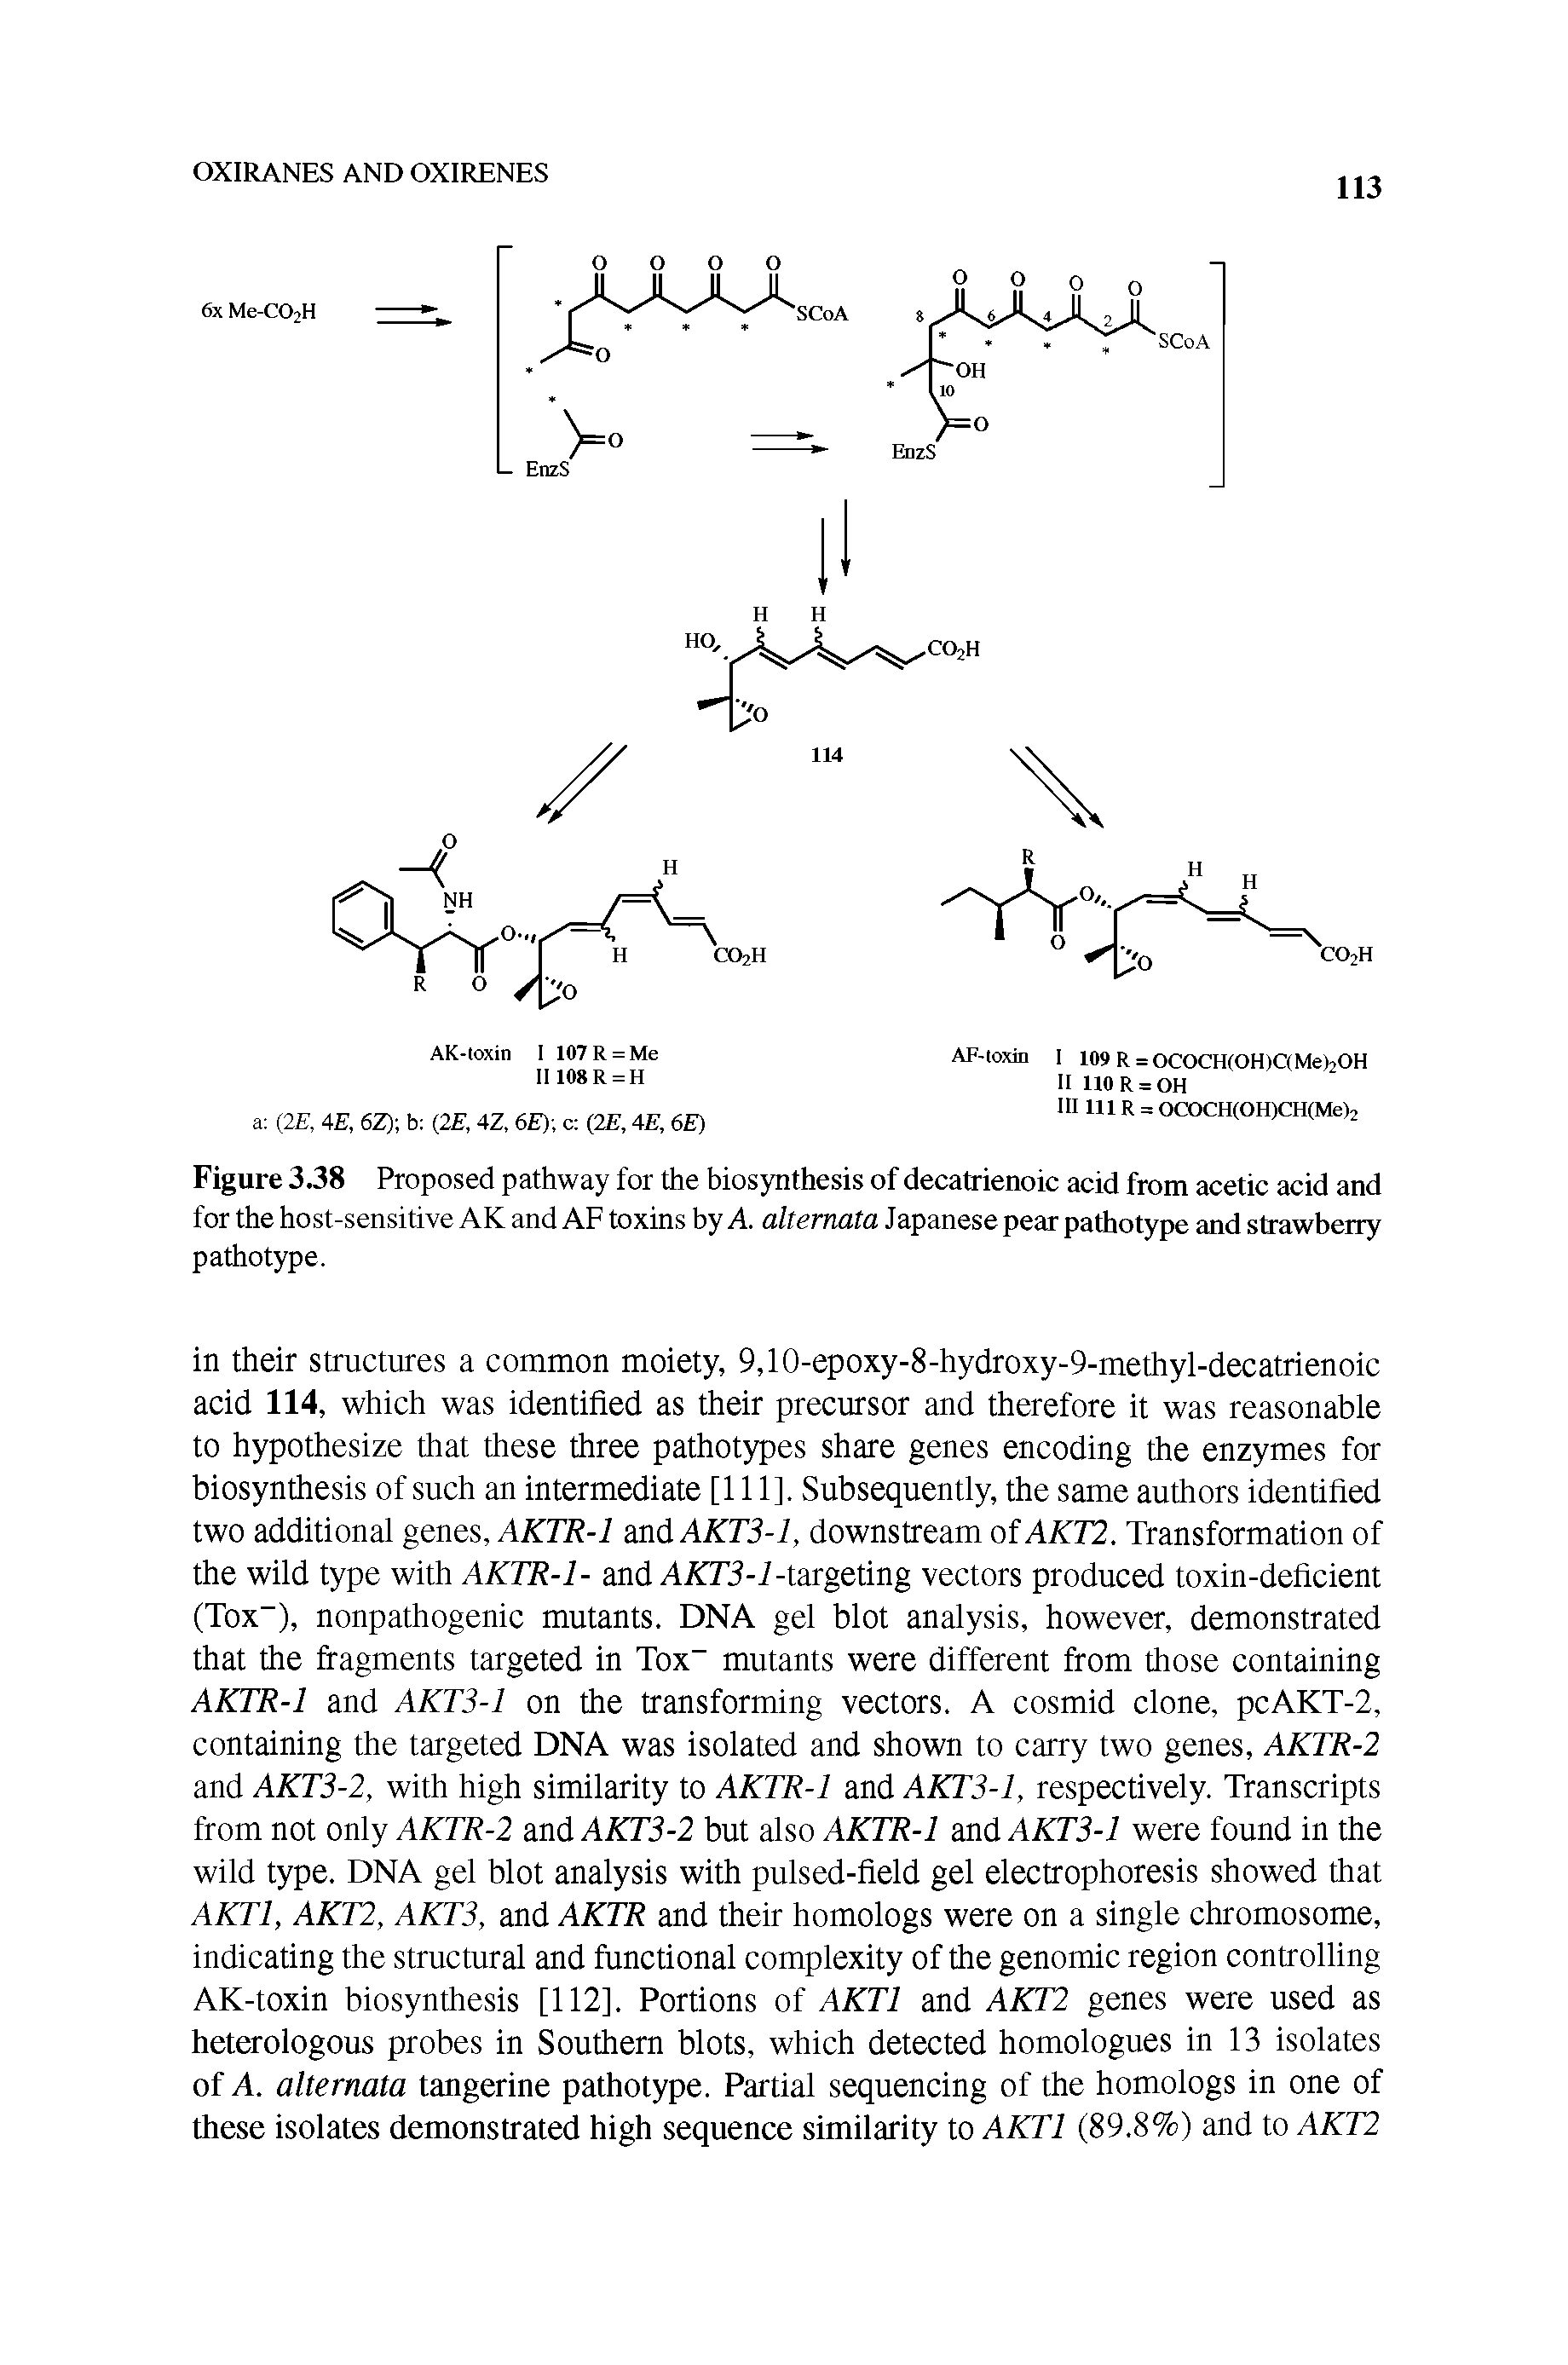 Figure 3.38 Proposed pathway for the biosynthesis of decatrienoic acid from acetic acid and for the host-sensitive AK and AF toxins by A altemata Japanese pear pathotype and strawberry pathotype.